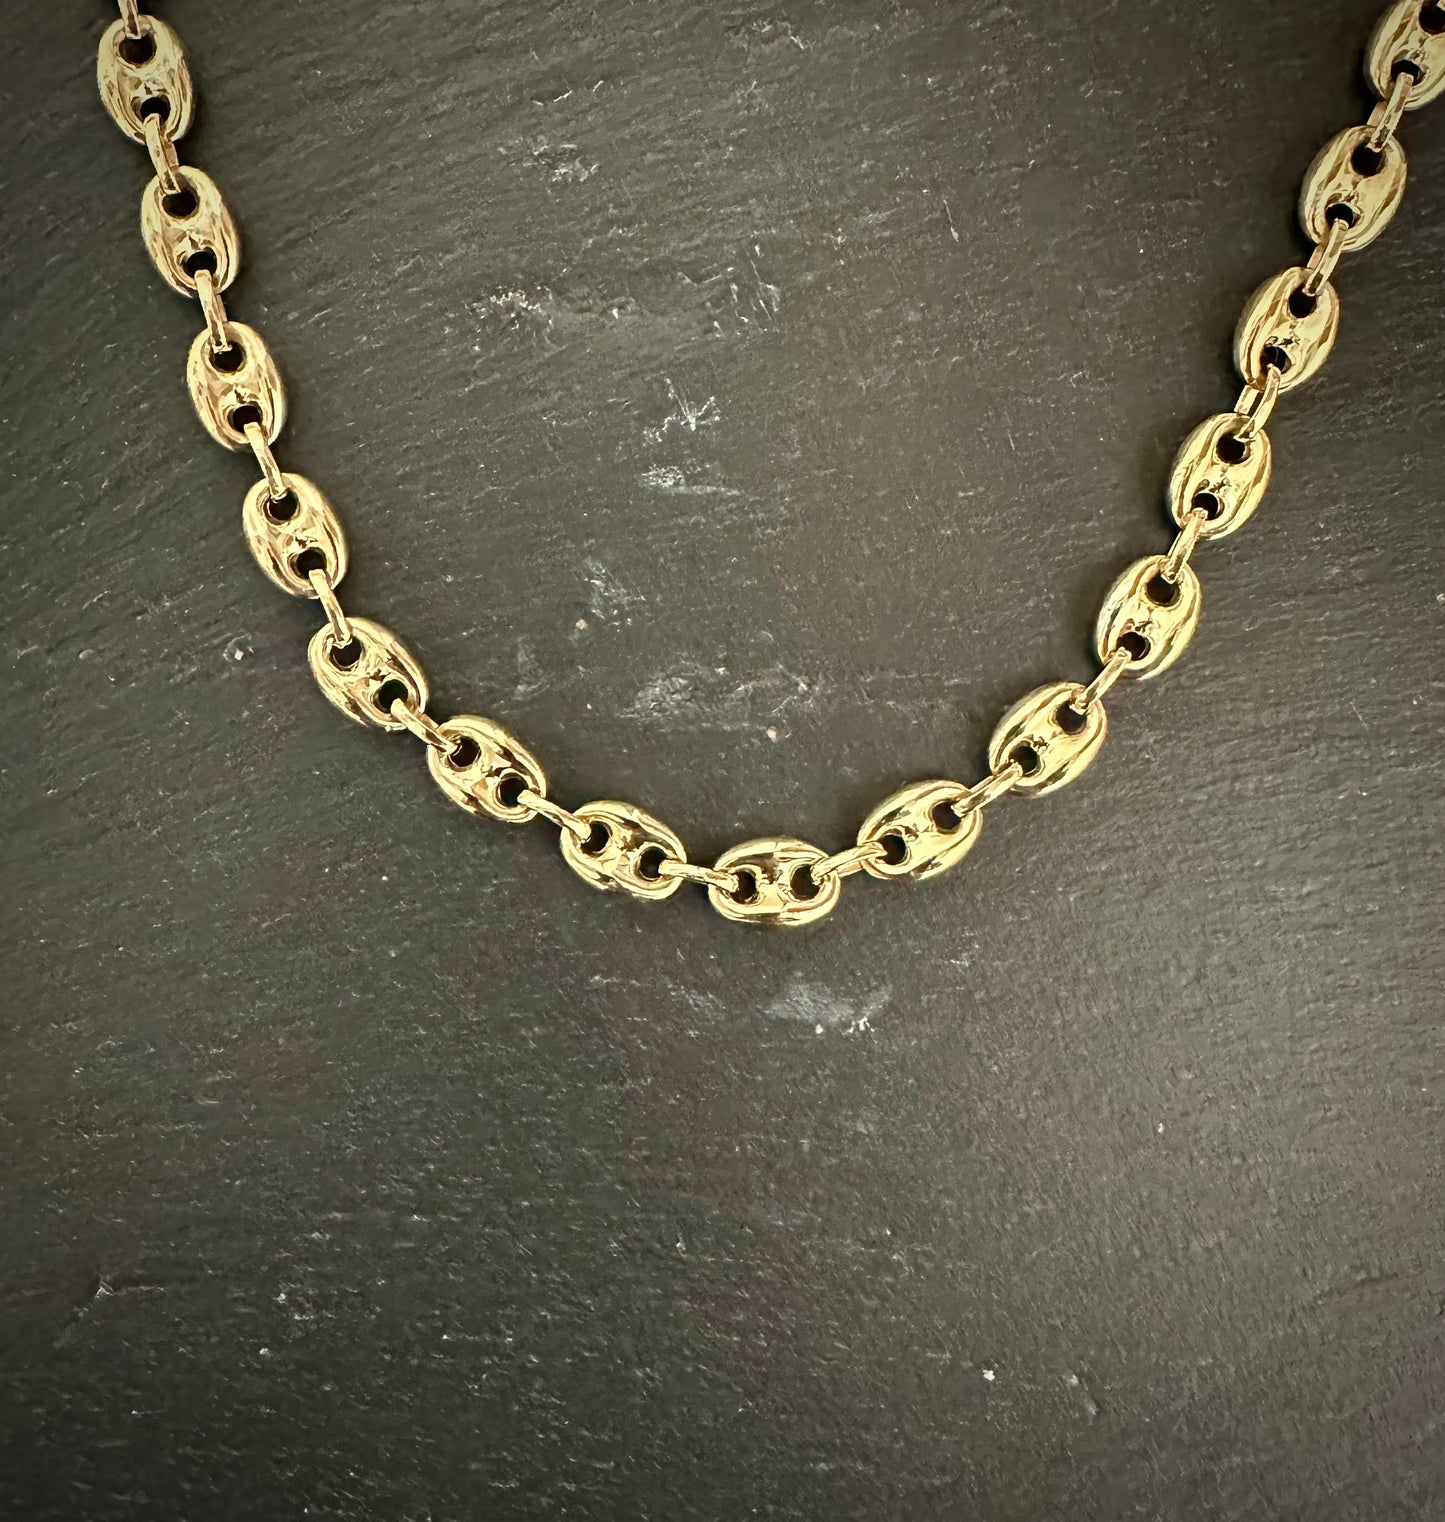 Pre-Owned: 9ct yellow gold 'Gucci' link chain.